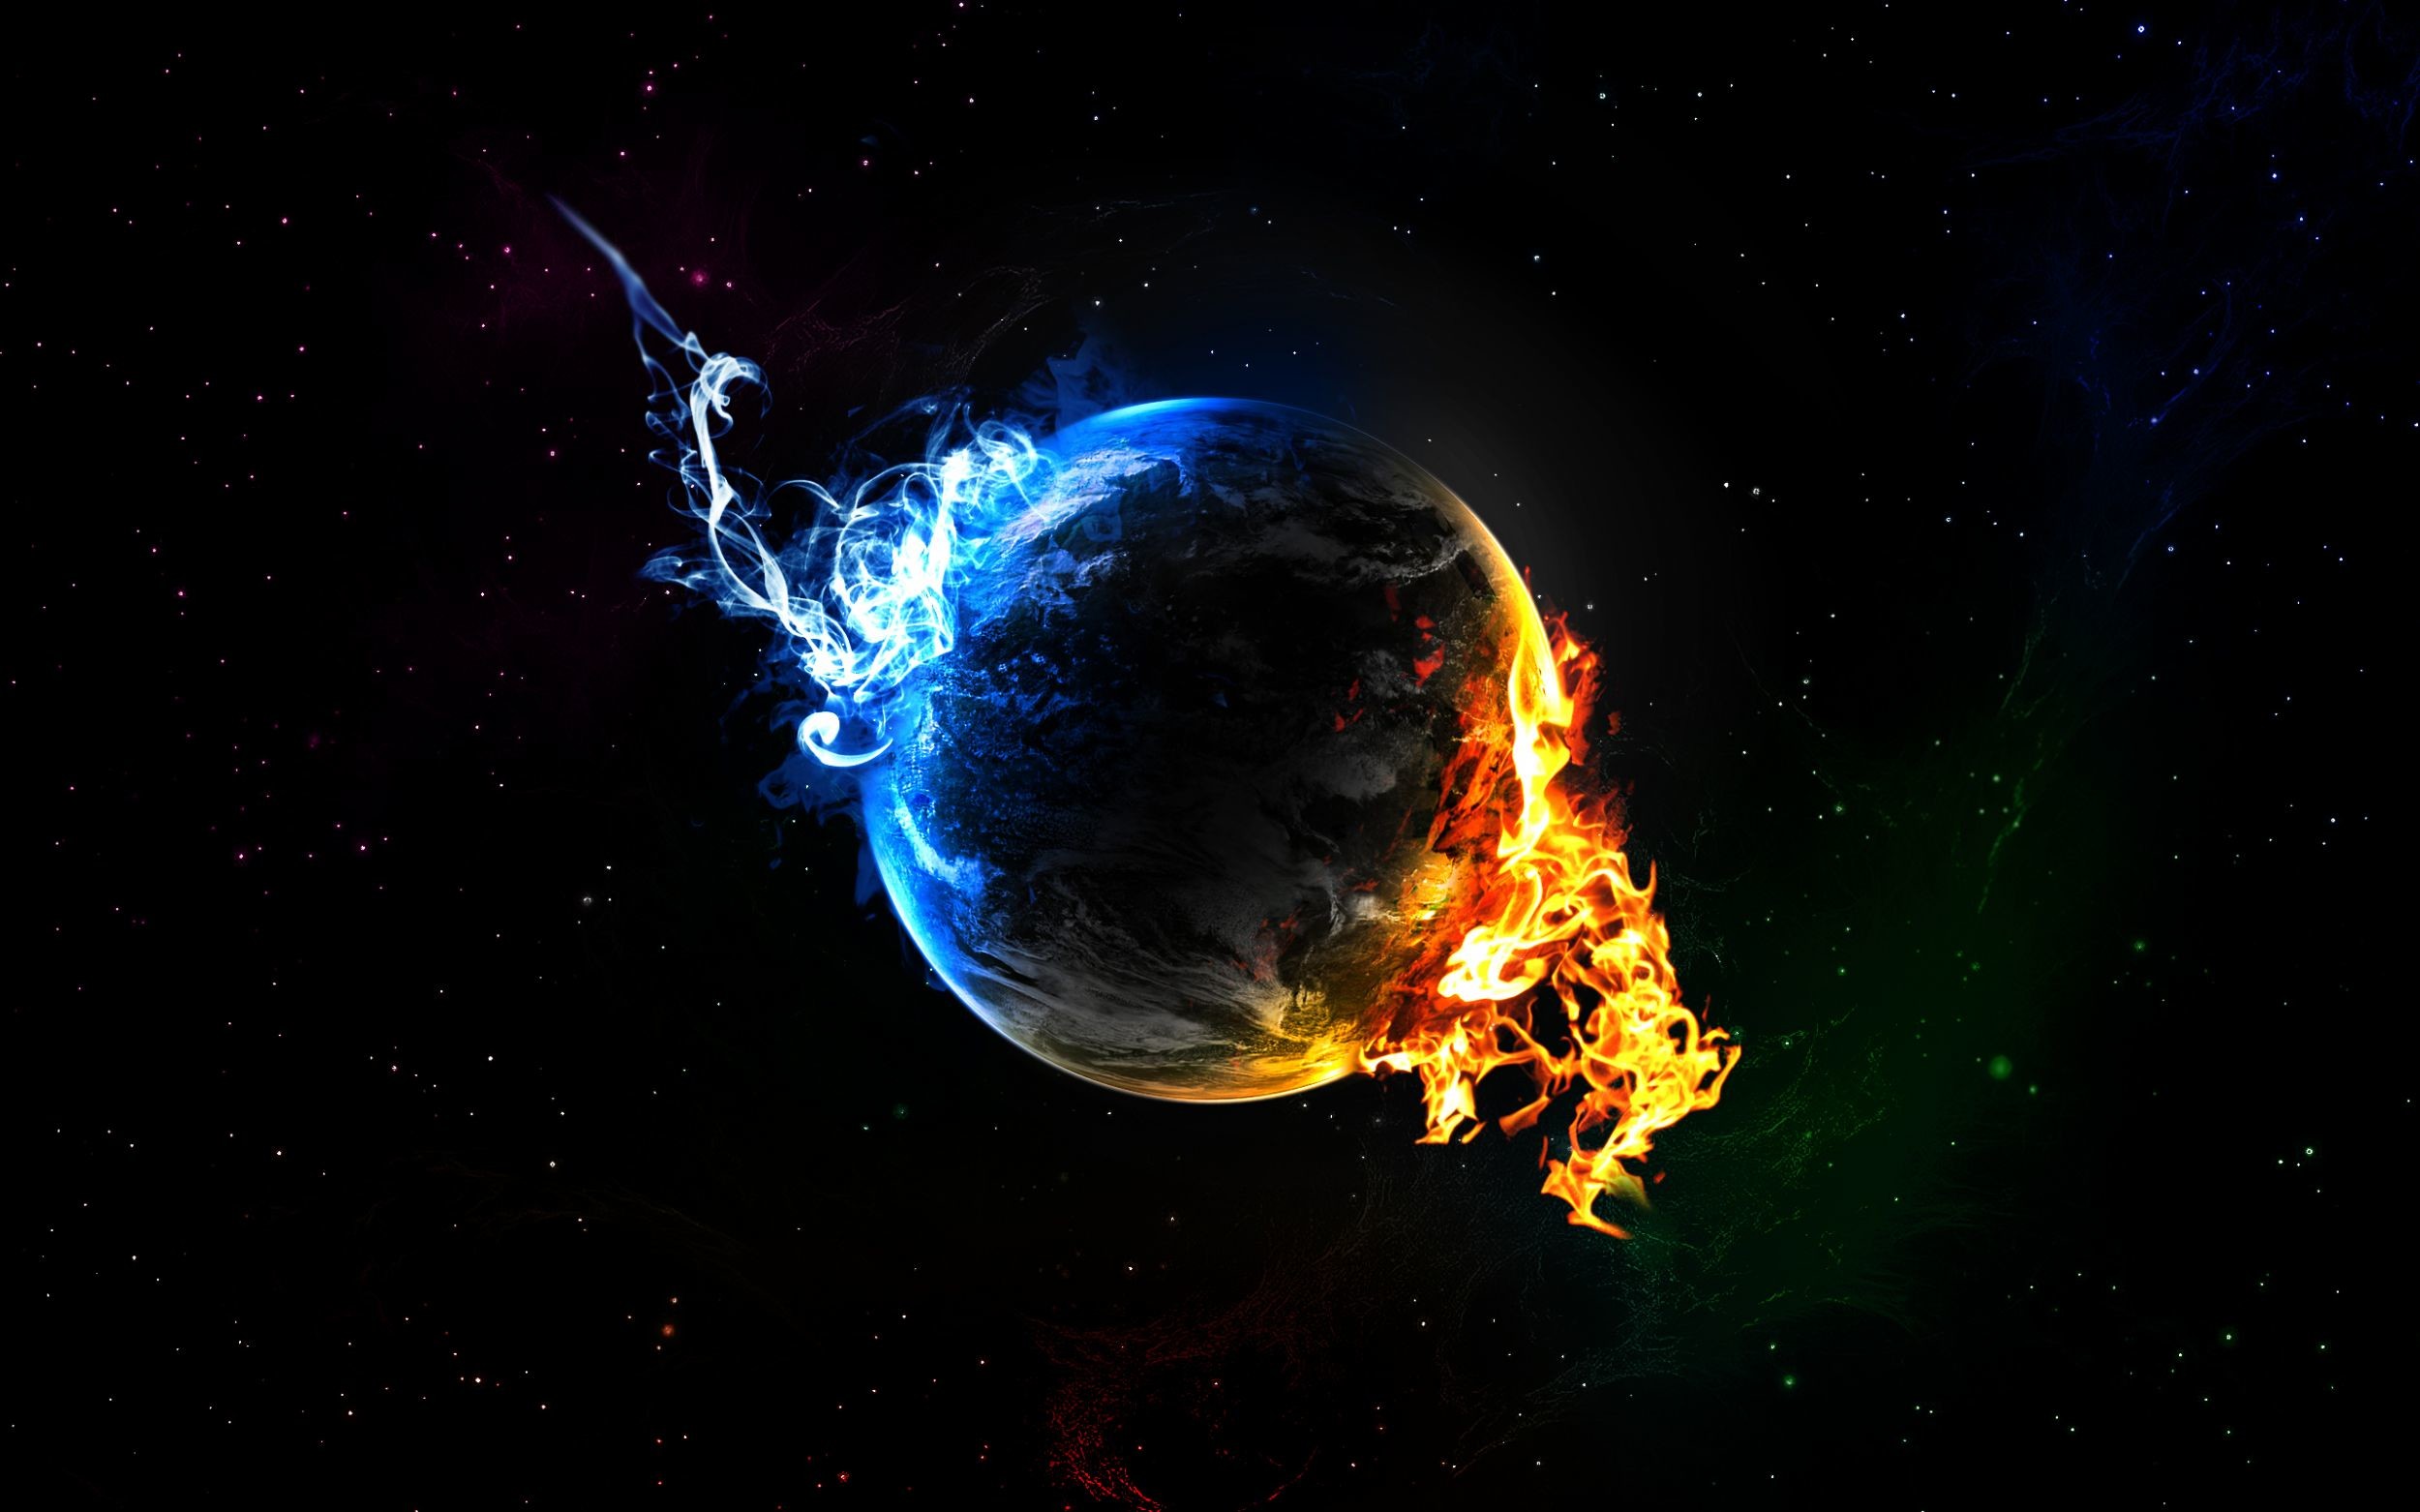 1920x1080, Cool Desktop Backgrounds Moving - Fire And Ice World - HD Wallpaper 